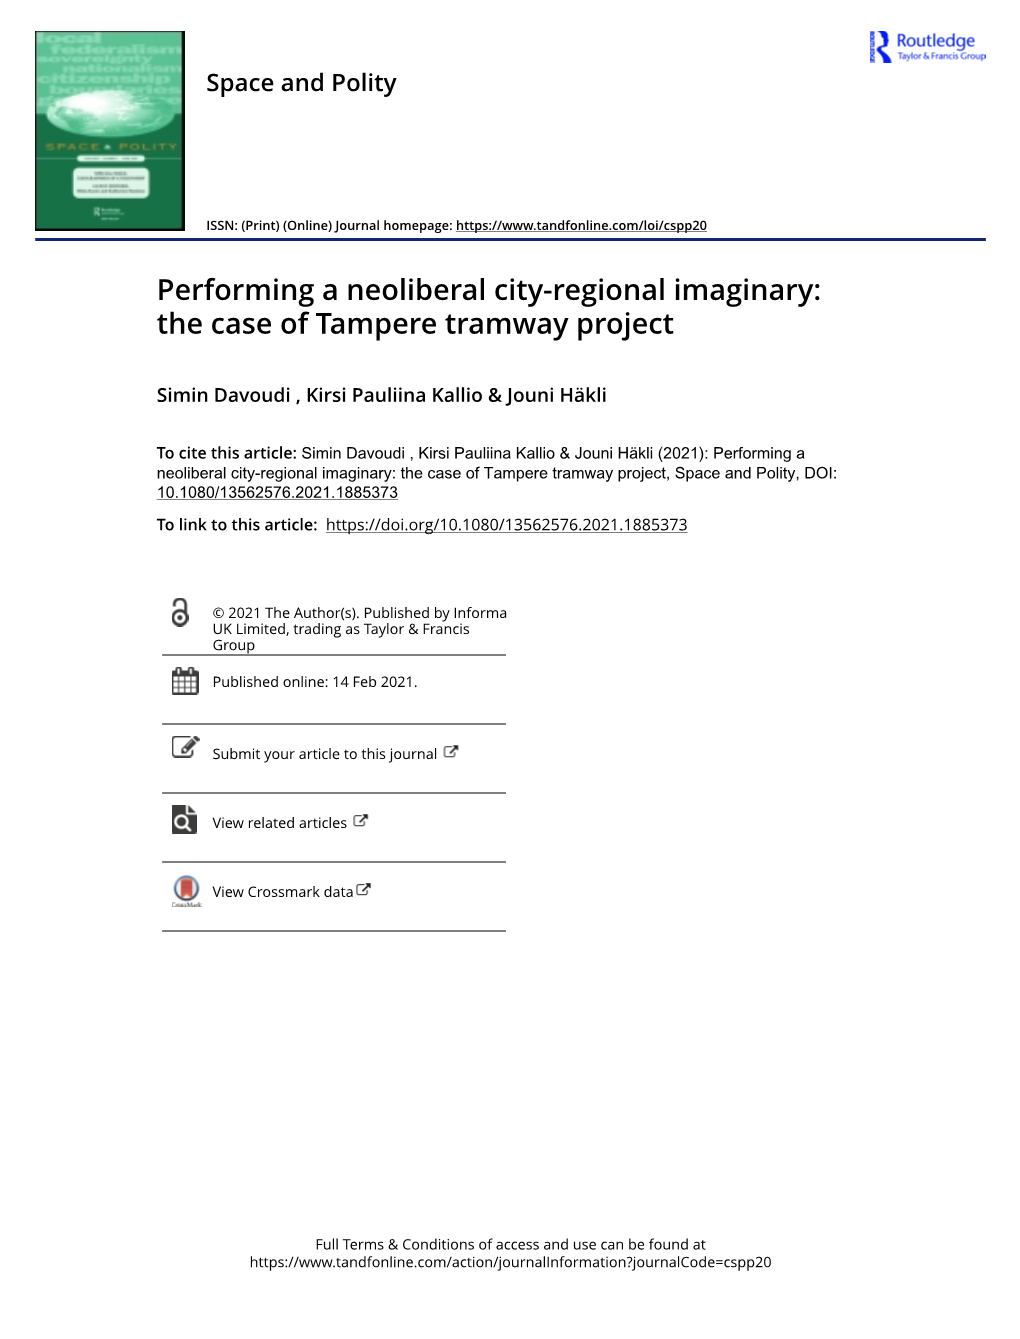 Performing a Neoliberal City-Regional Imaginary: the Case of Tampere Tramway Project